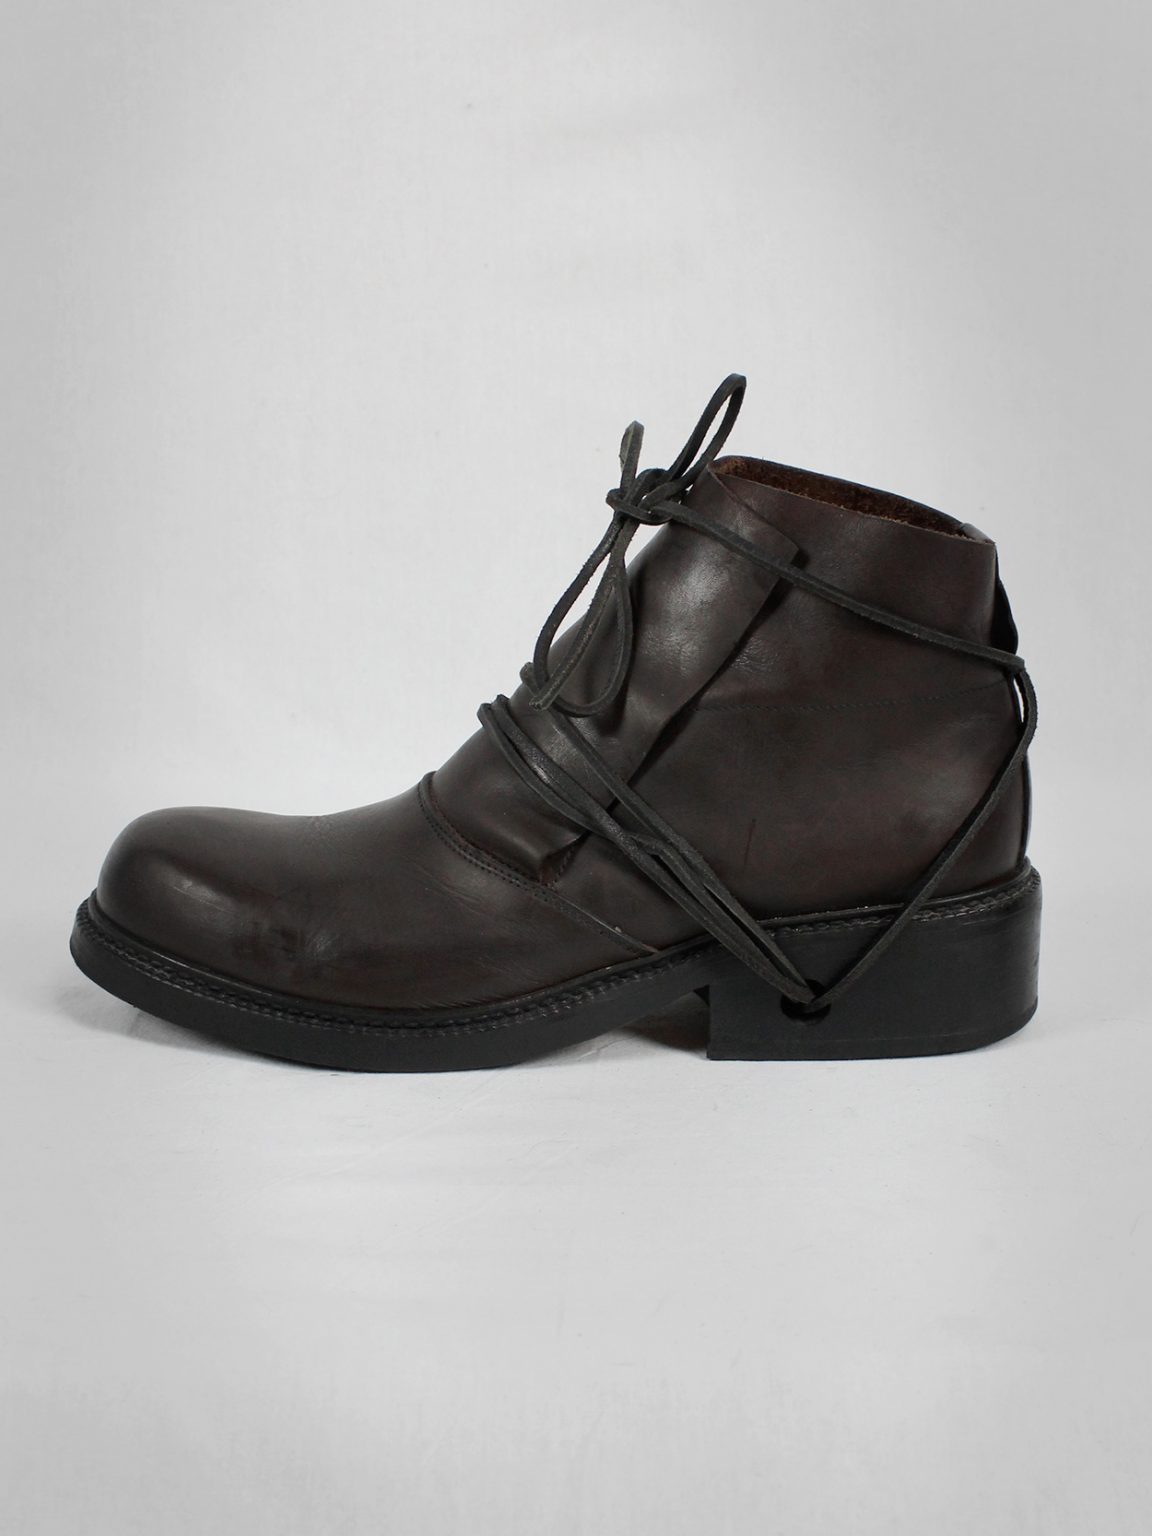 Dirk Bikkembergs brown boots with flap and laces through the soles (44) — late 90's